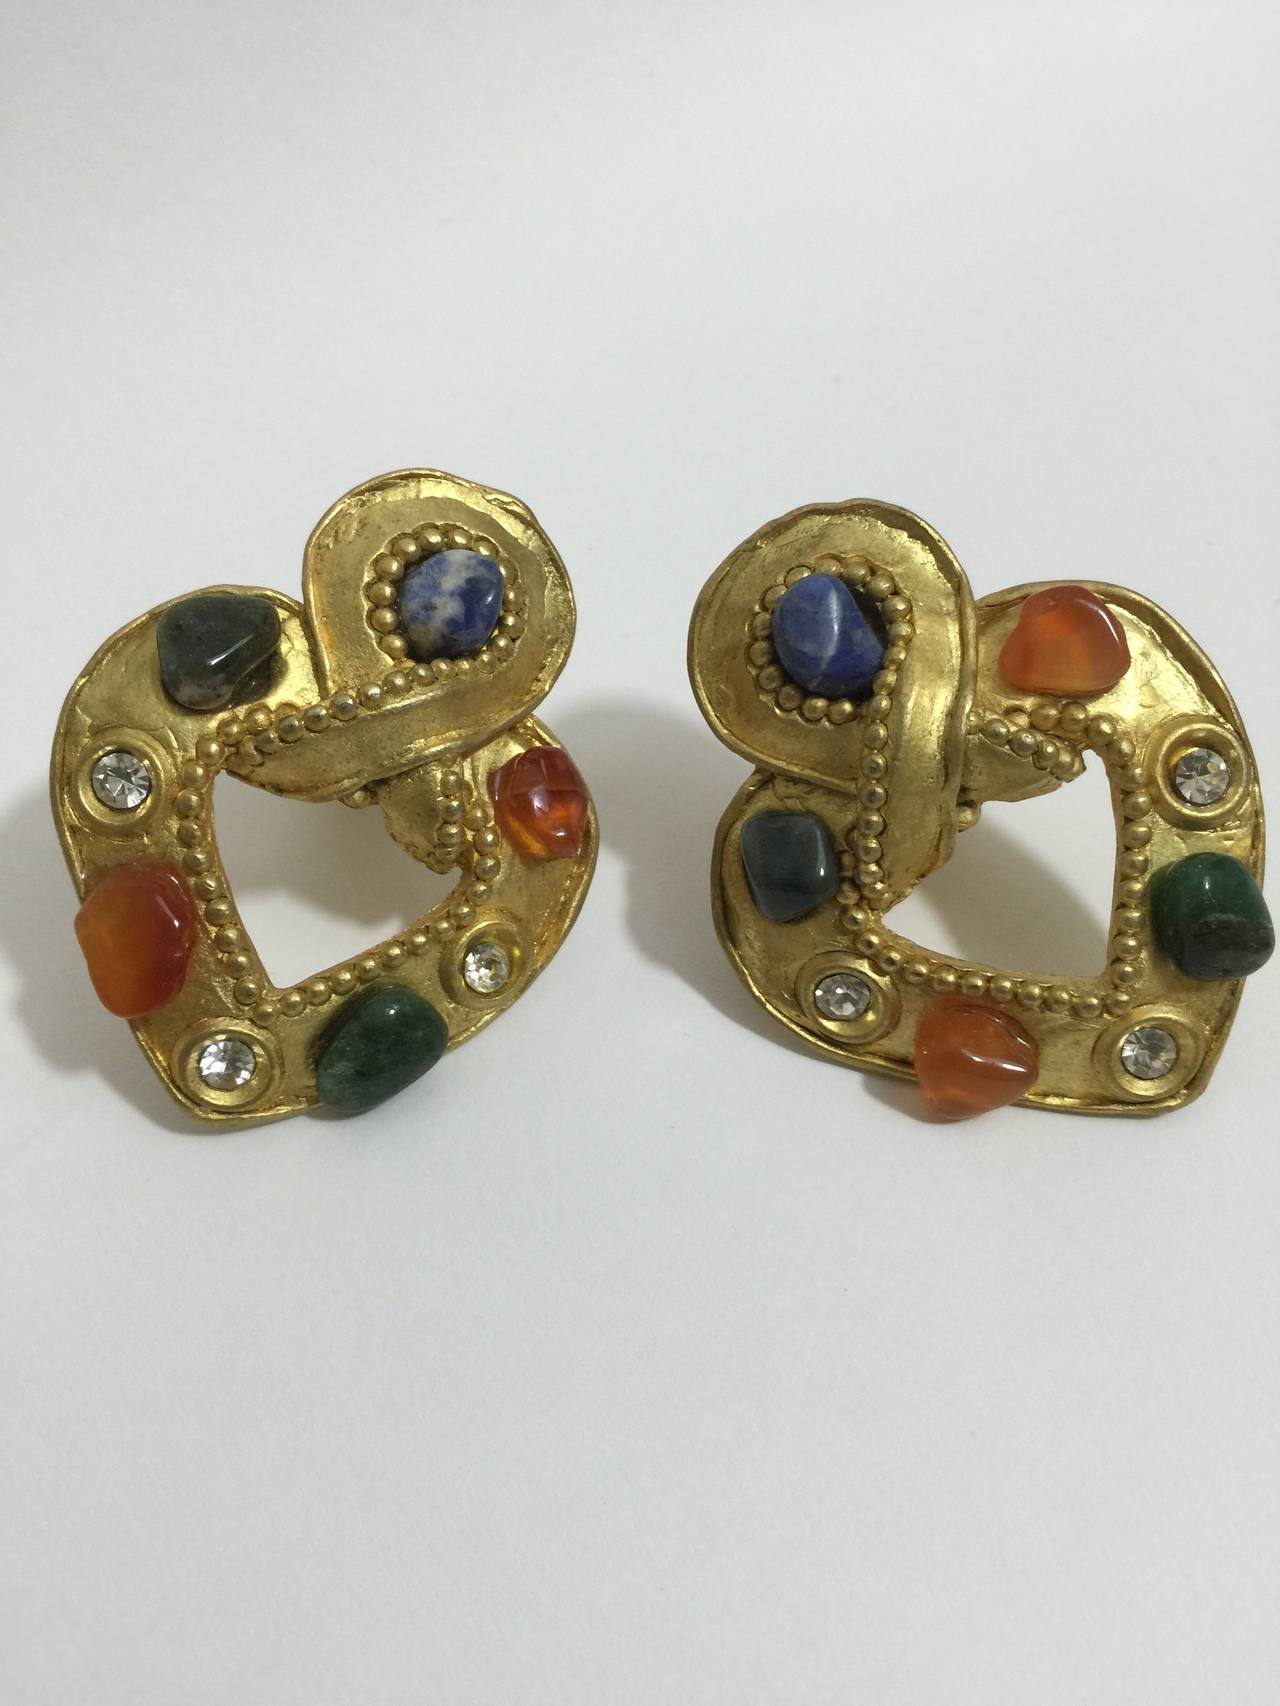 Beautiful matte gold vintage Claire Deve Paris Heart Earrings, Intricate gold bead detail.
Rhinestones & Natural semiprecious stone accents.

Claire Deve has designed jewelry for fashion's 
most prestigious designers including; Chanel, Jean